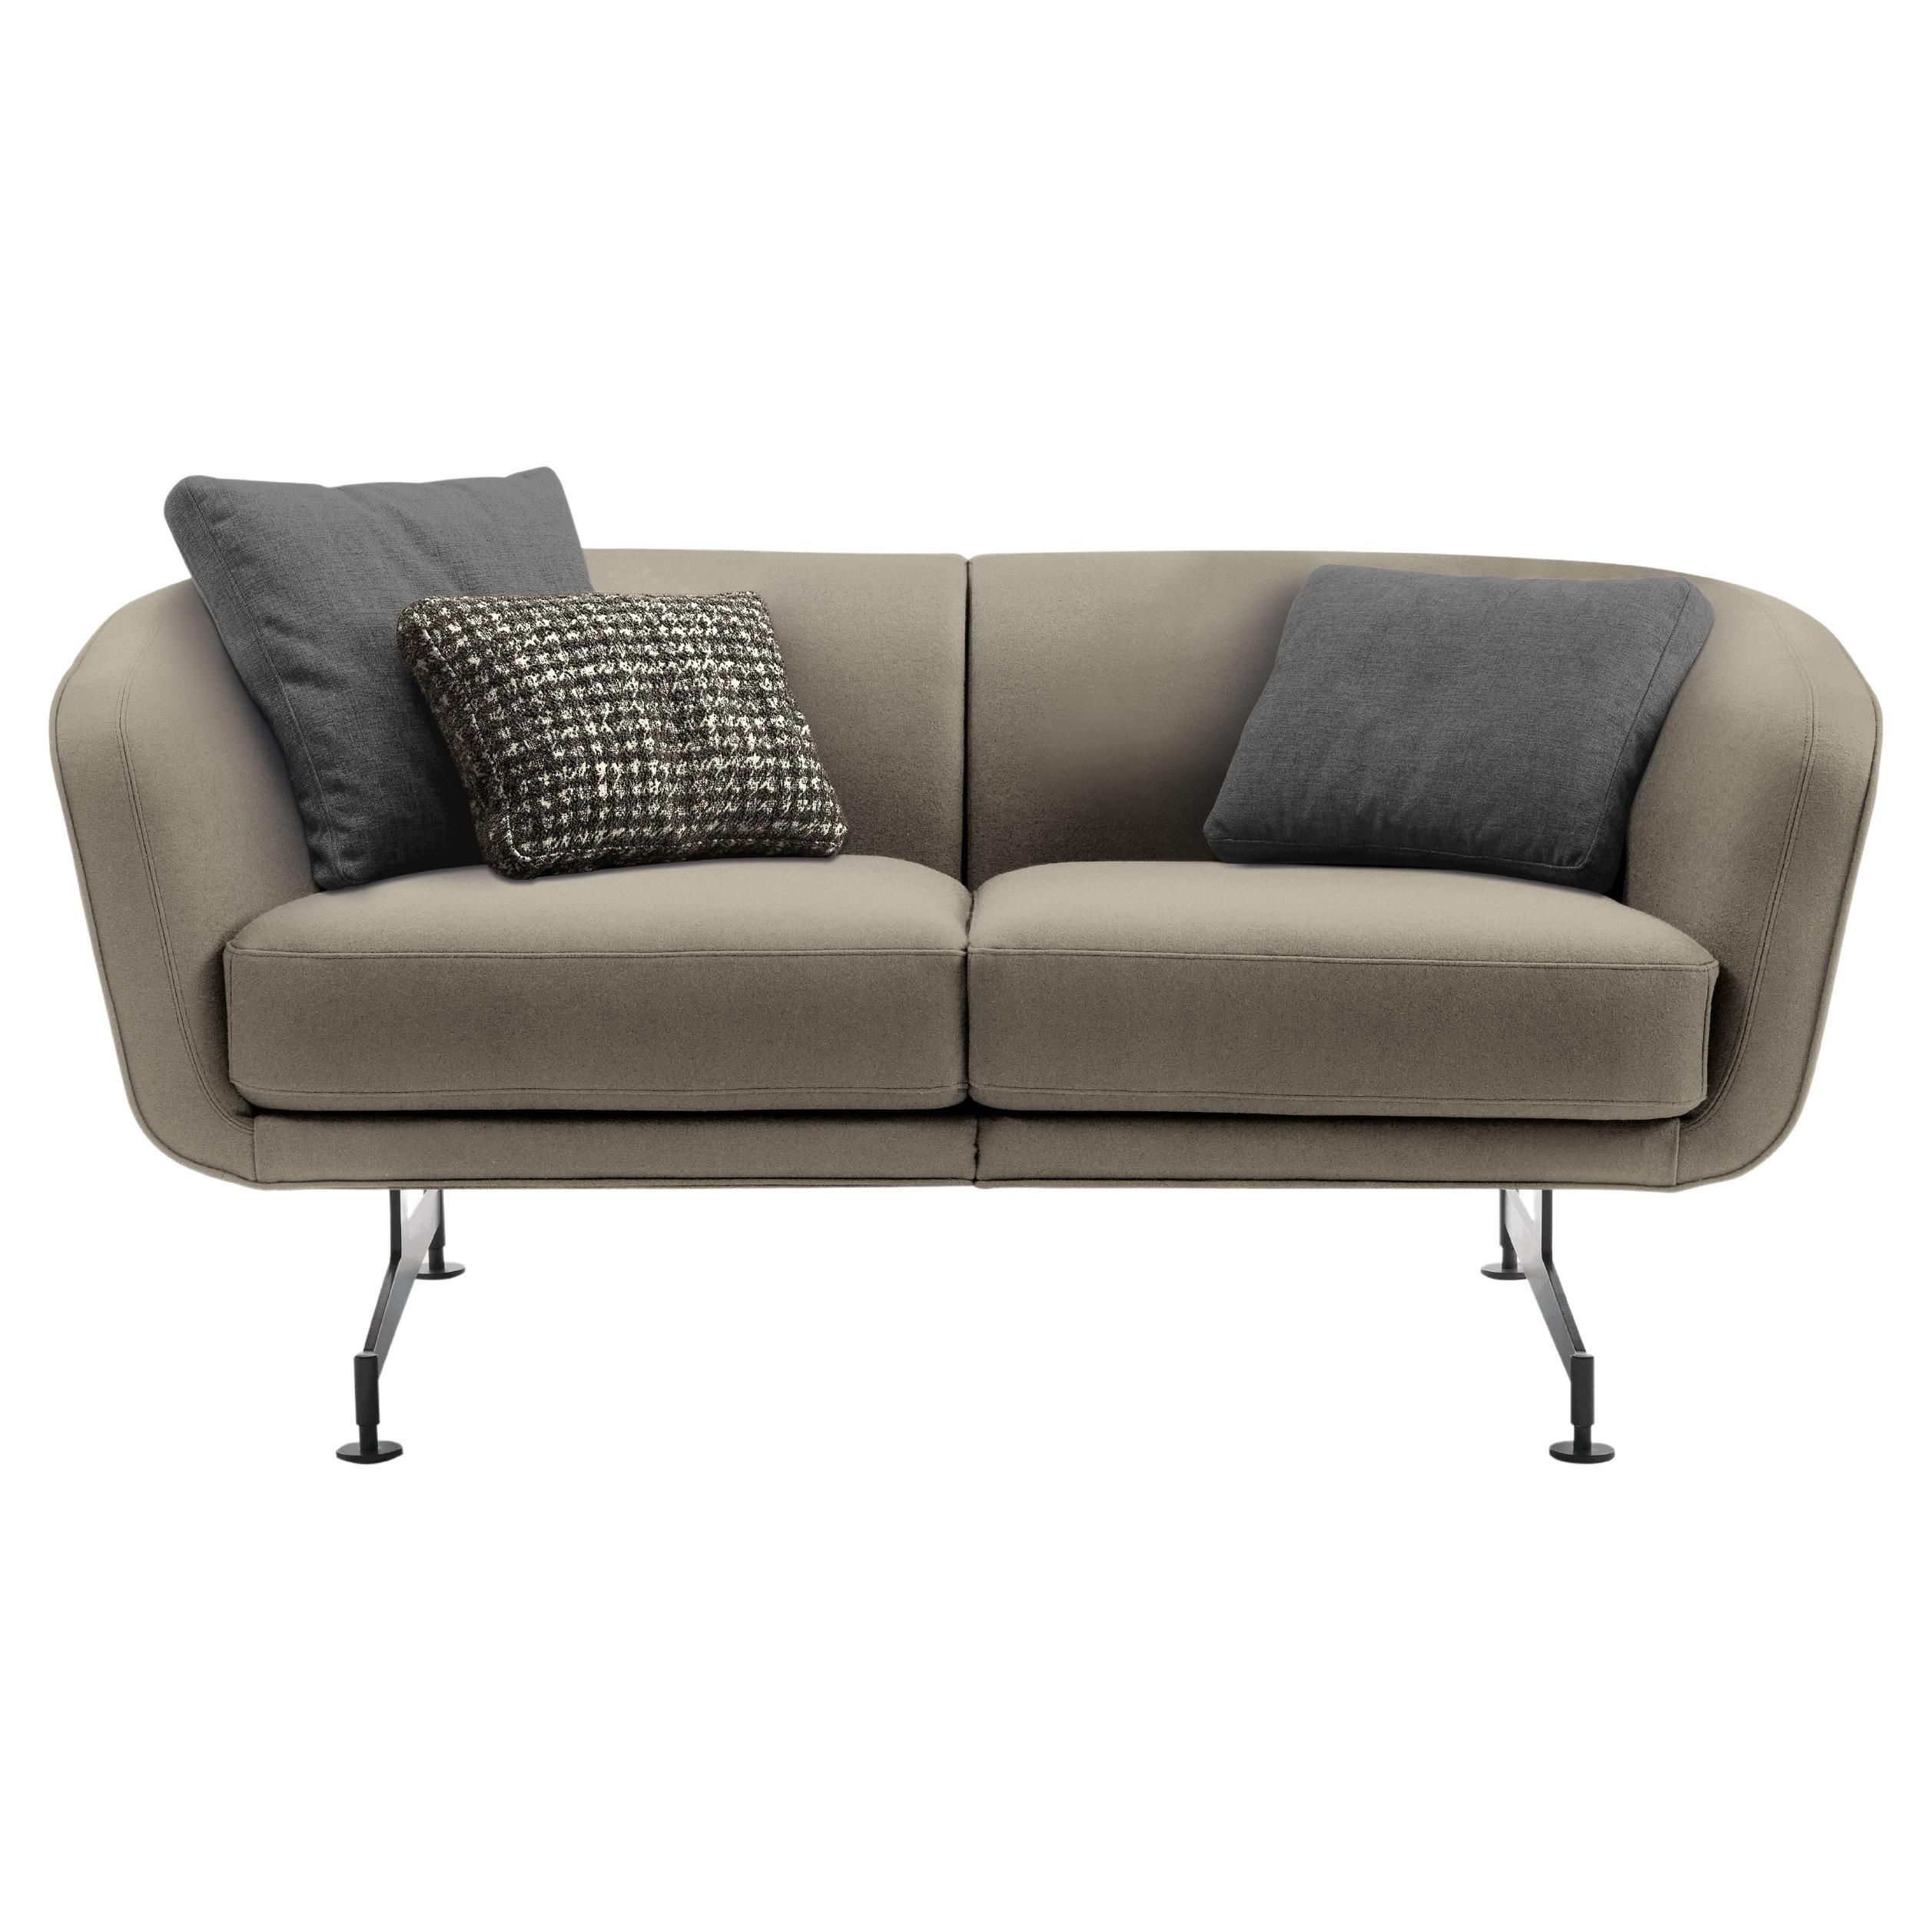 Betty is the two and three-seater sofa by Kartell with soft and rounded lines that create a comfortable and enveloping seat.

Available in beige, brown, grey, teal, orange, brown.